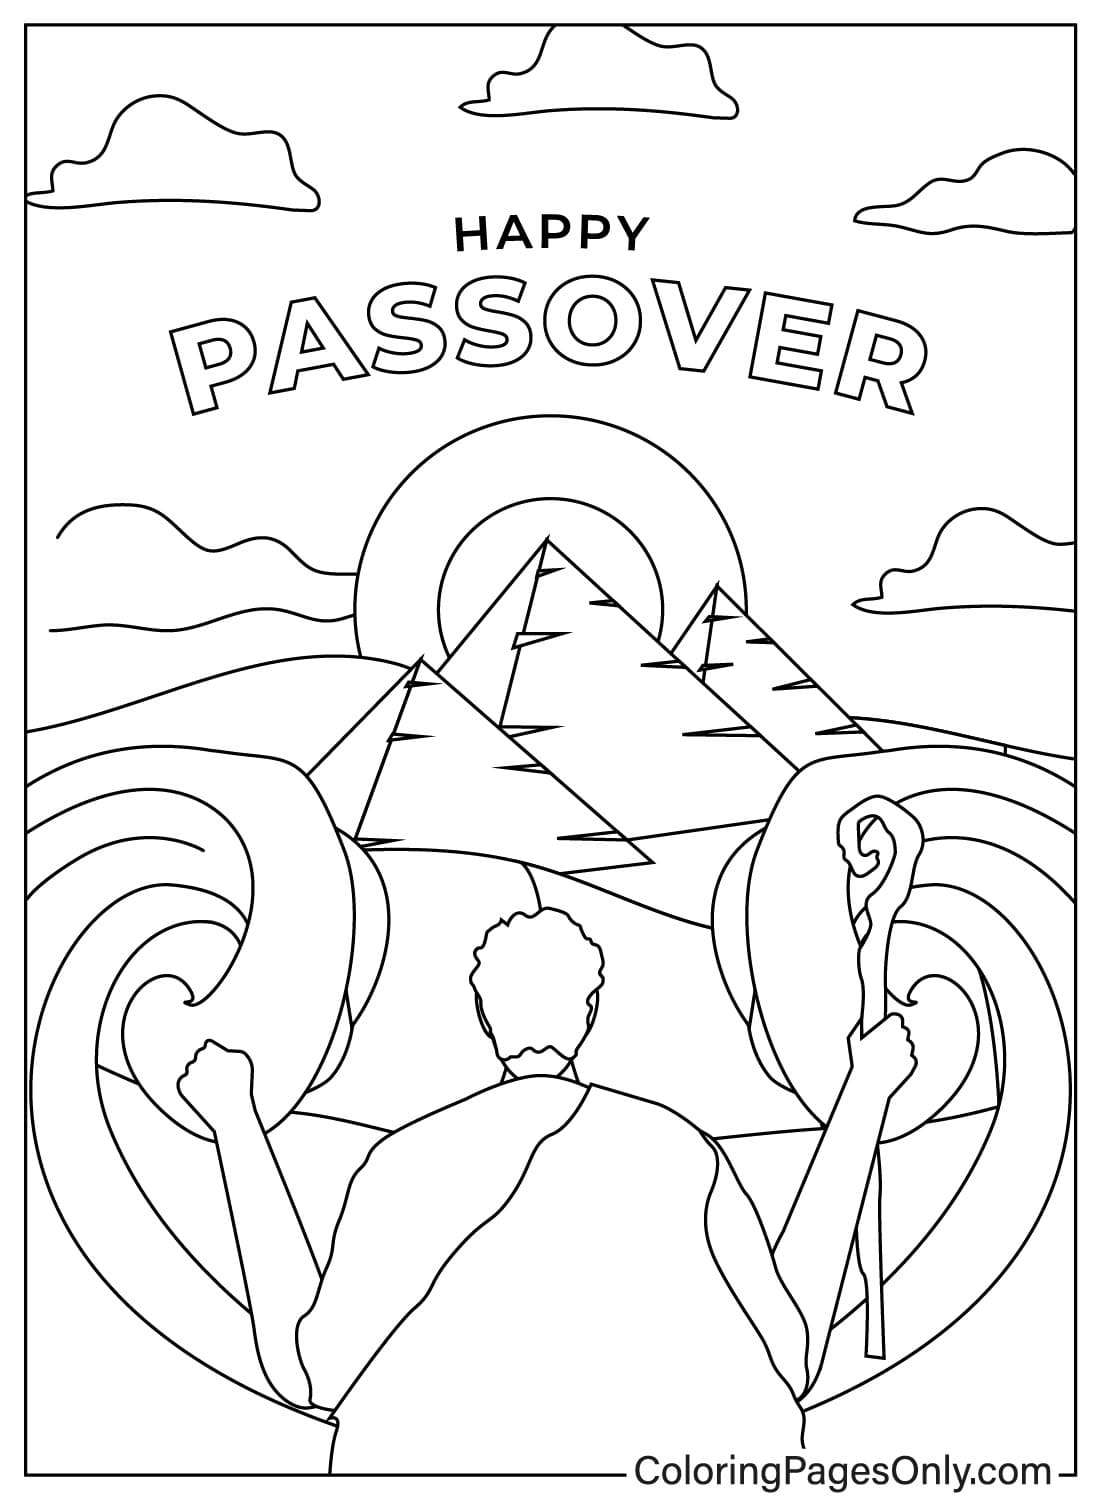 Passover Vectors Coloring Pages from Passover